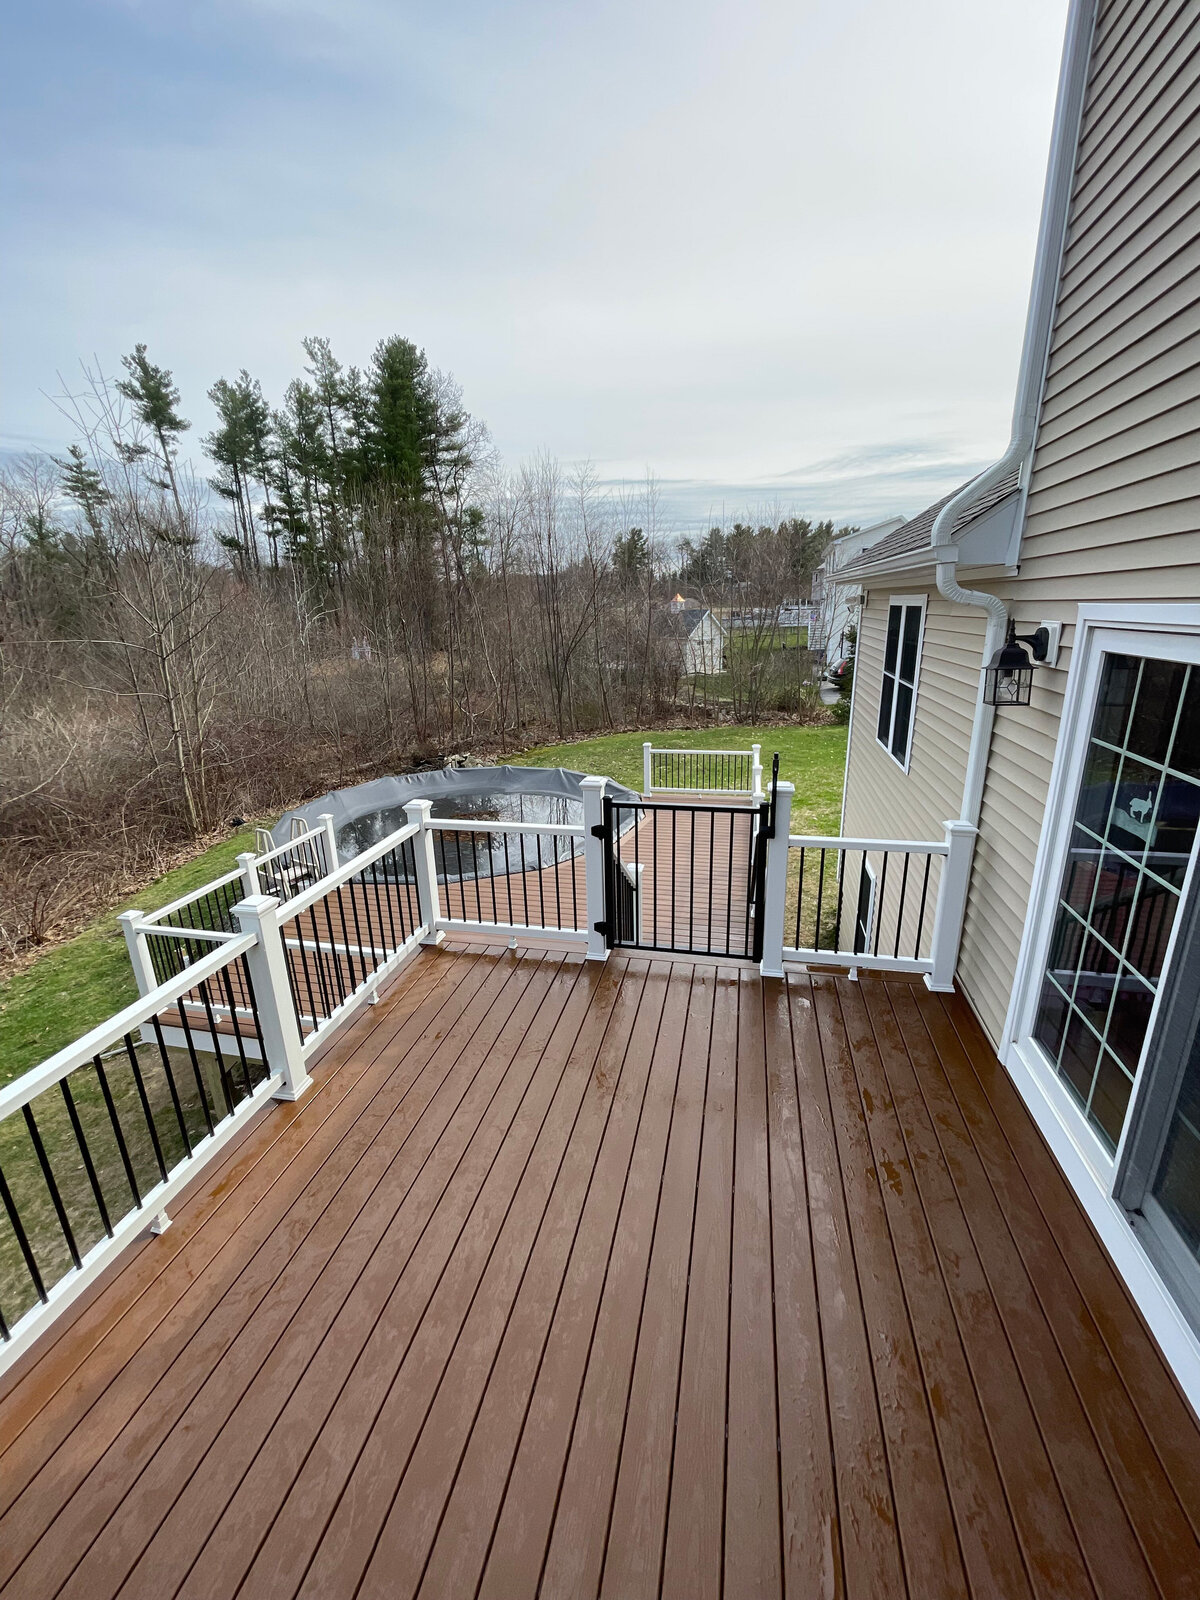 A view from a top deck of a multi tier deck built by a West Boylston Deck Contractor using composite